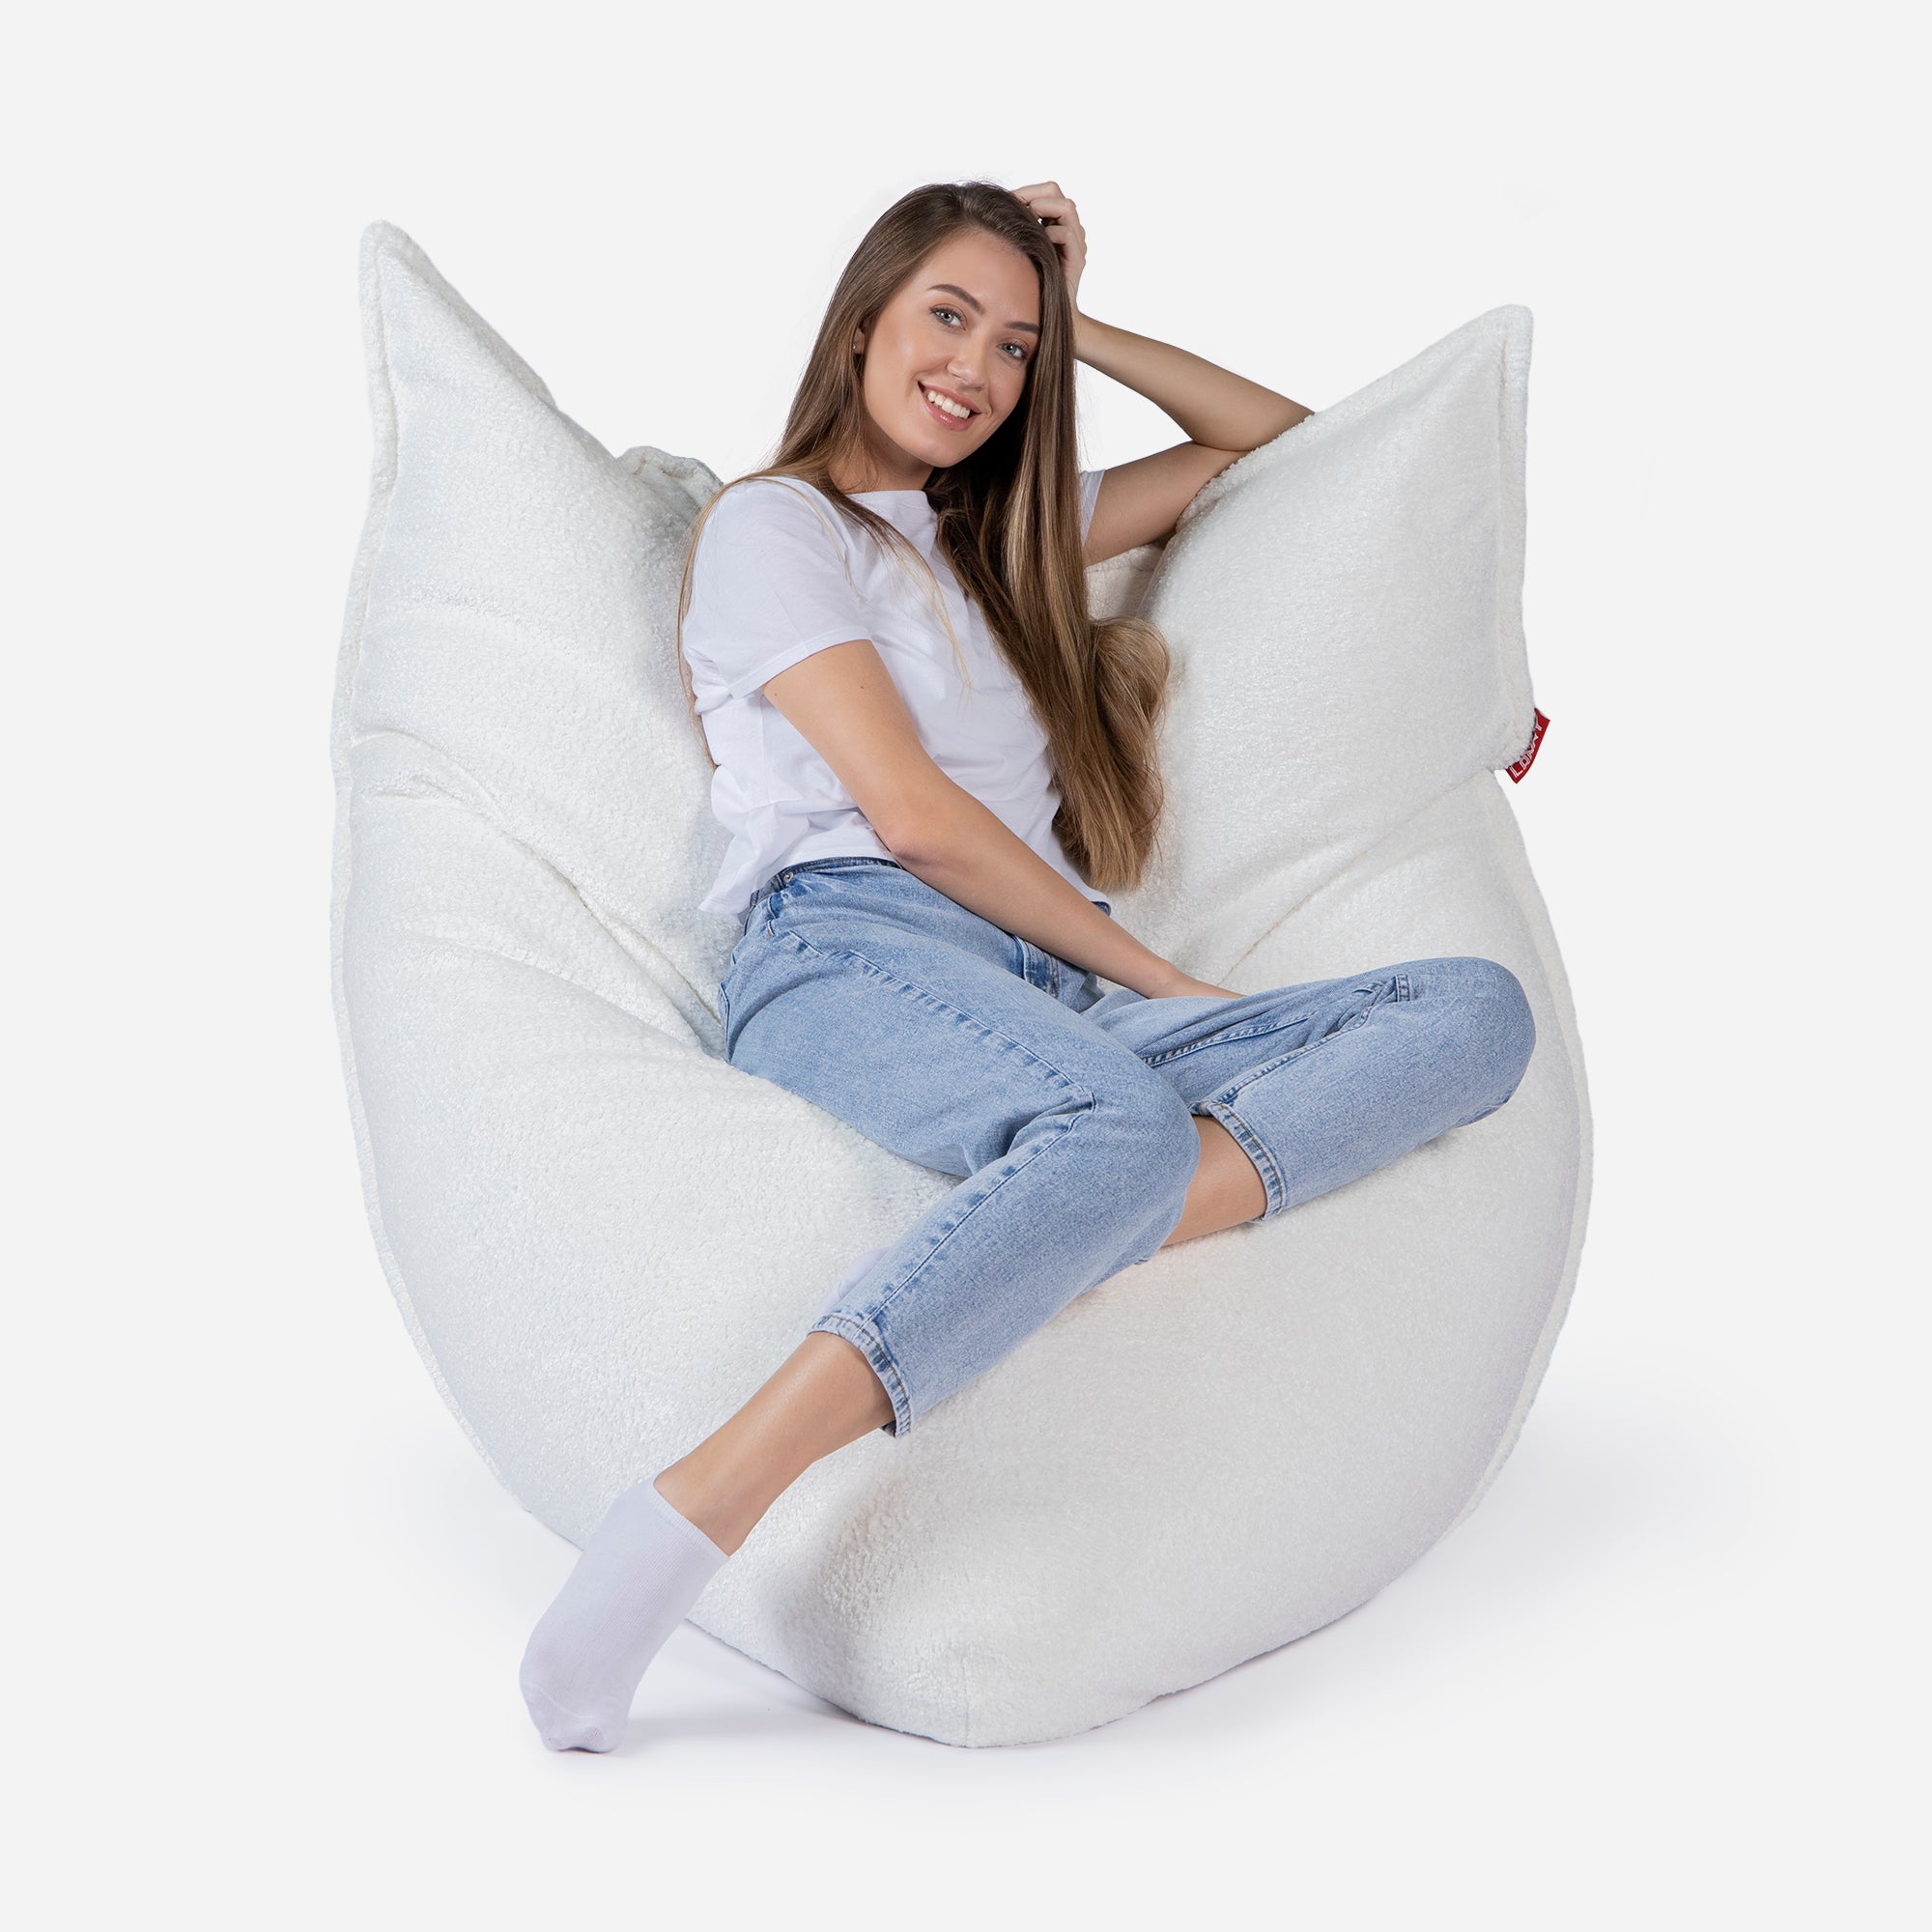 Beanbag Sloppy design fluffy fabric White color  with girl seating on it 